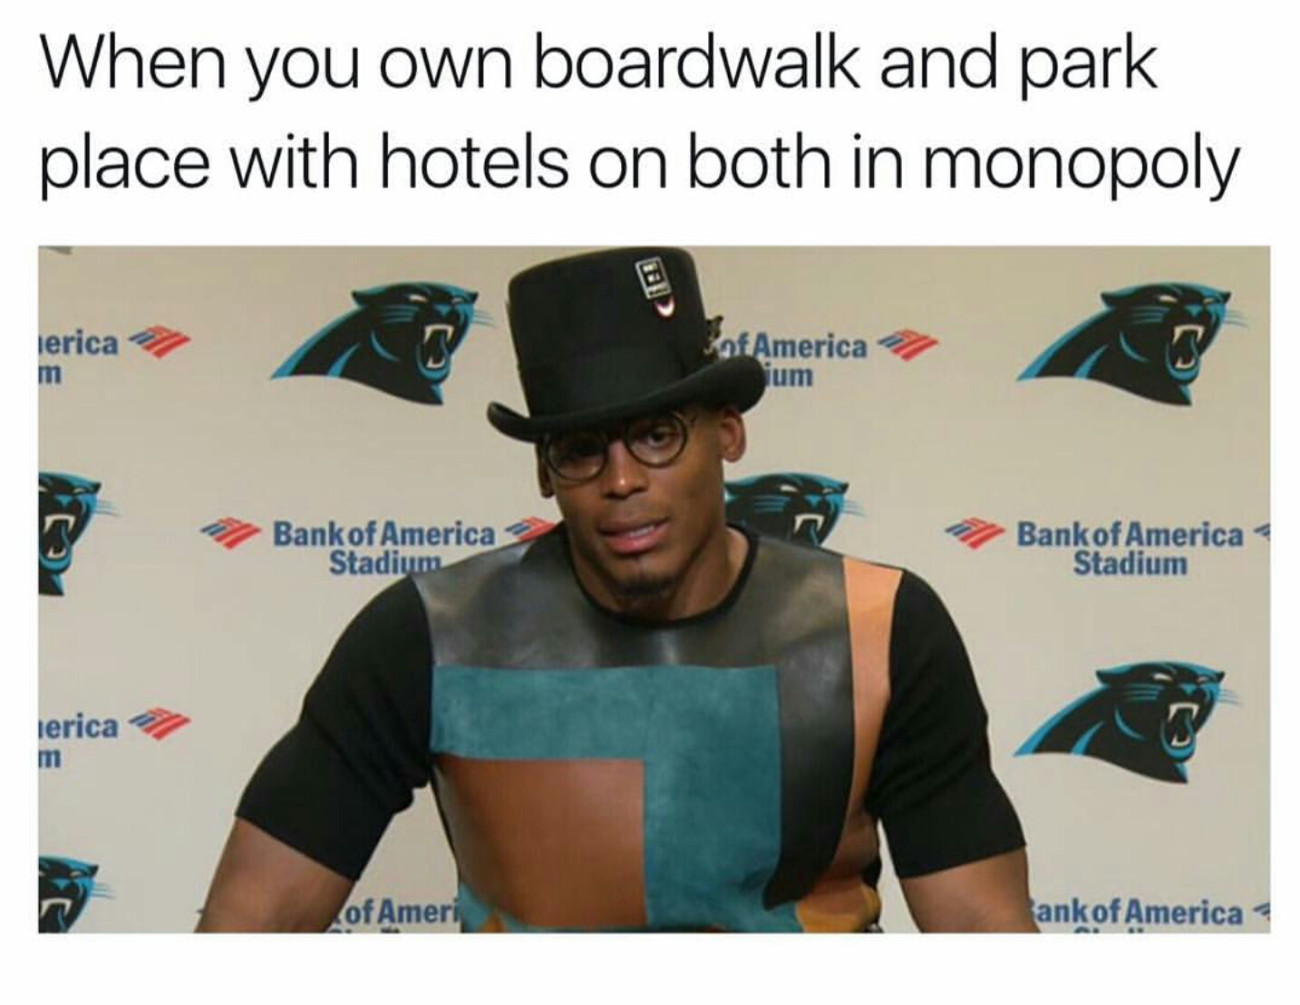 cam newton harry potter - When you own boardwalk and park place with hotels on both in monopoly jerica Kof America m Tum Bank of America Stadium Bank of America Stadium Ierica m of Ameri ankof America